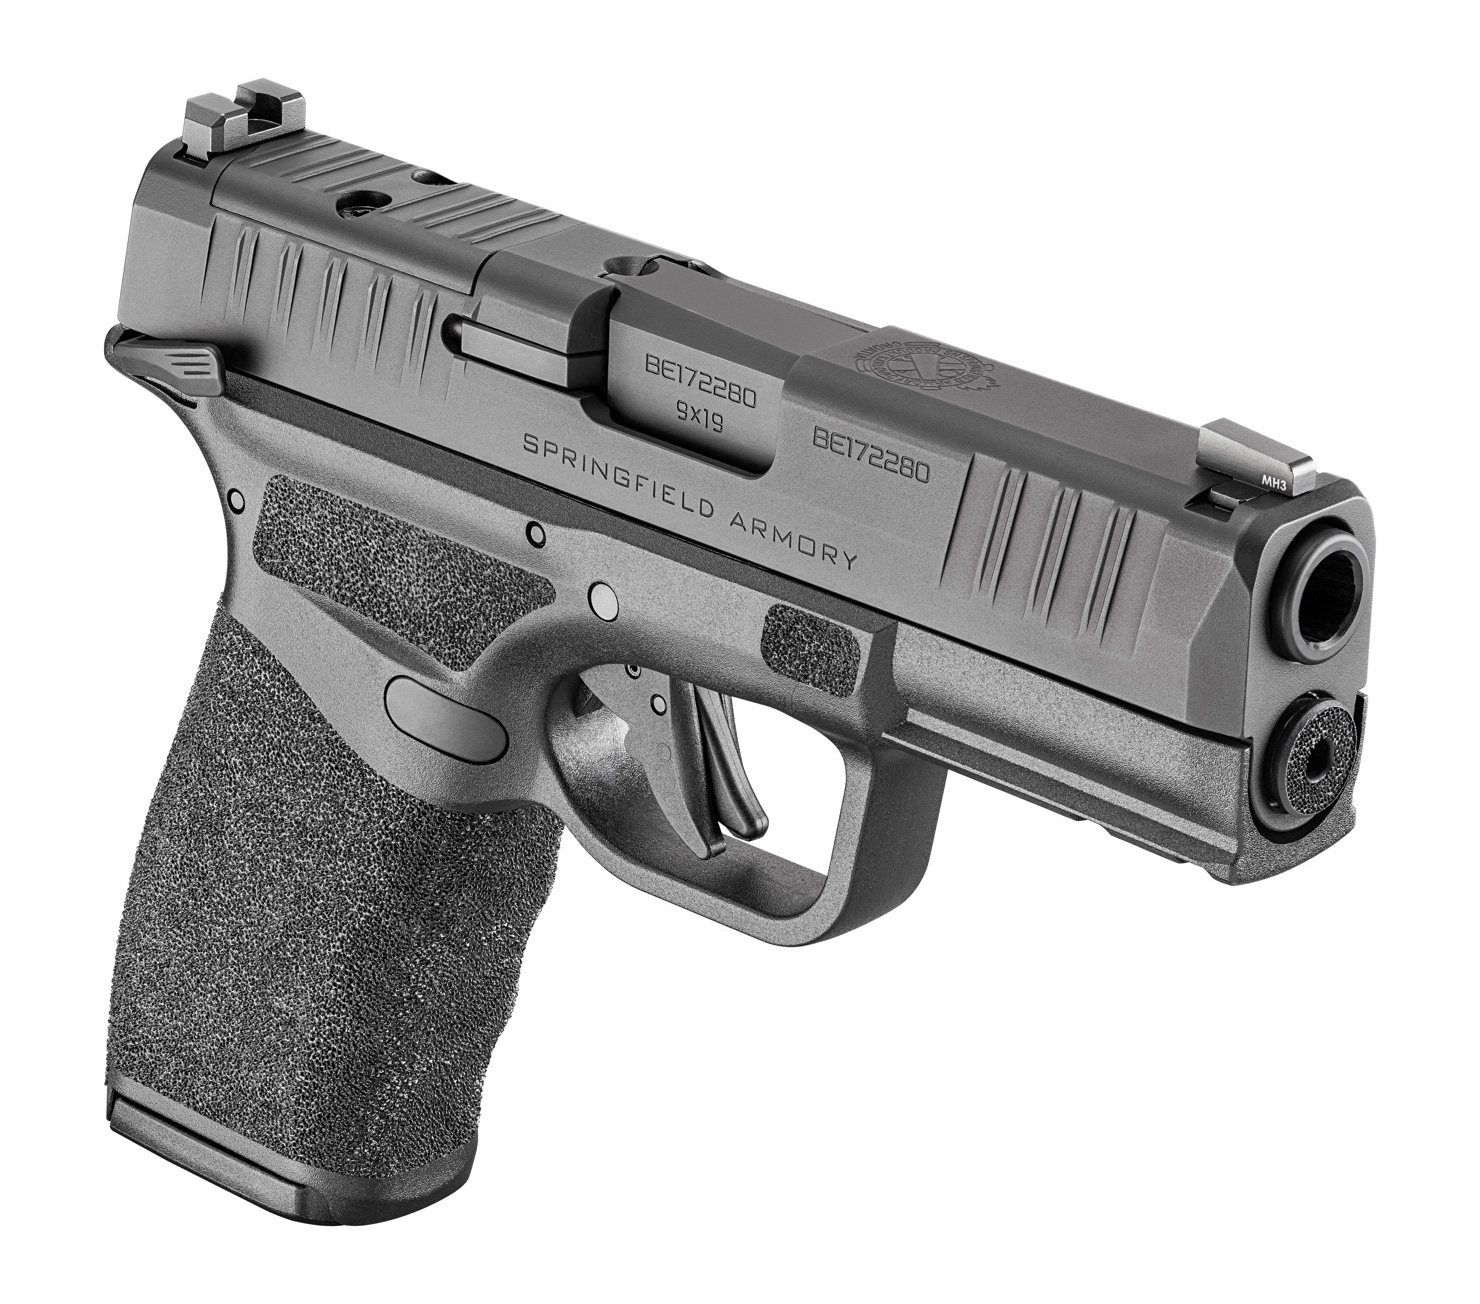 If you like a pistol with a thumb safety, Springfield Armory has you covered. The Hellcat Pro is available with an ambidextrous manual safety.